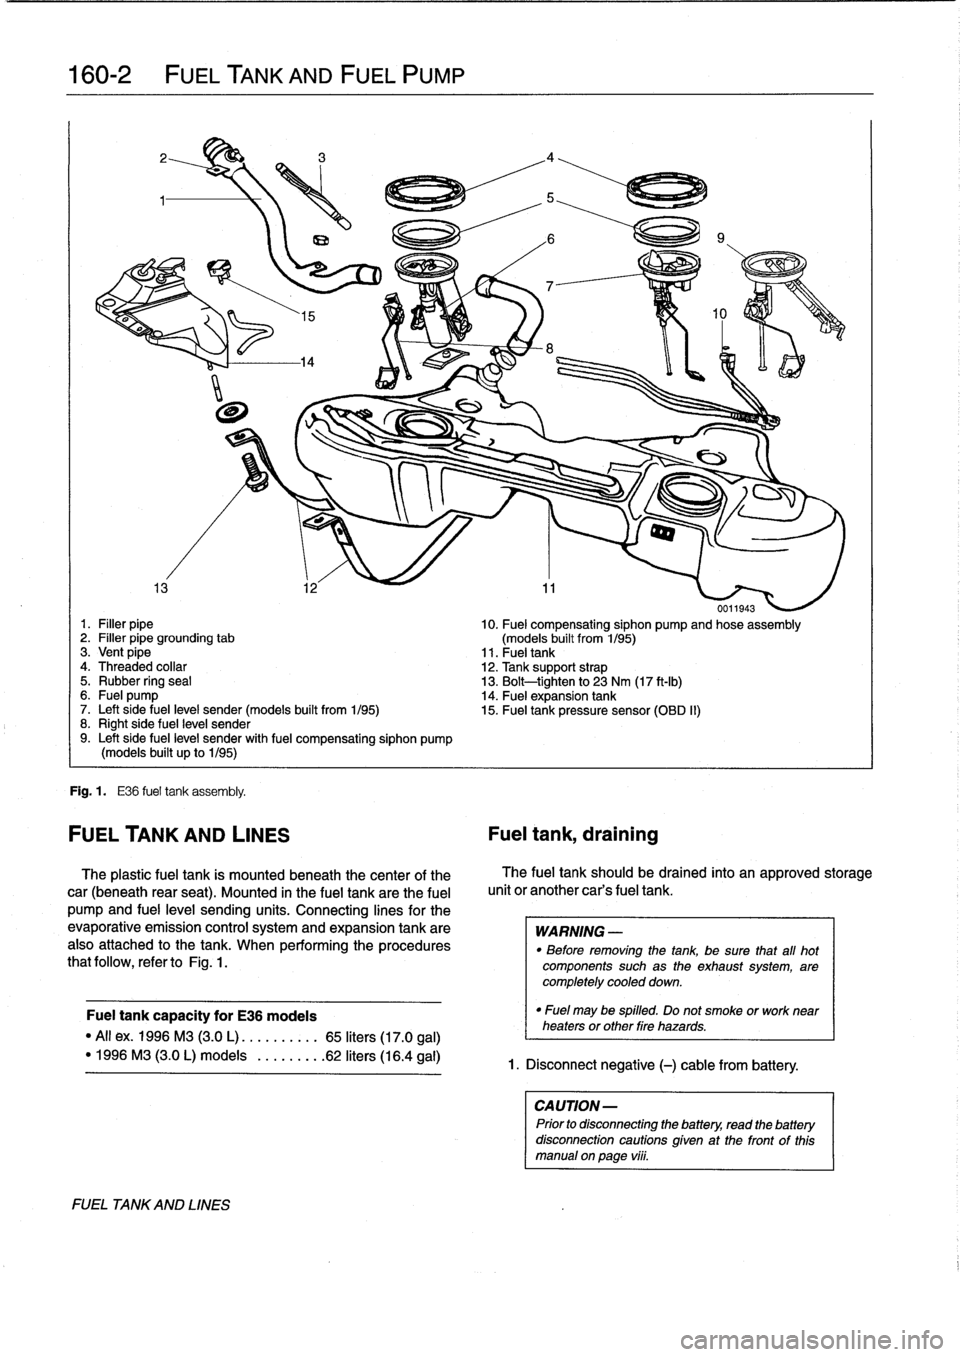 BMW 325i 1992 E36 Workshop Manual 
160-2

	

FUEL
TANK
AND
FUEL
PUMP

0011943
1
.
Filler
pipe

	

10
.
Fuel
compensating
siphon
pump
and
hose
assembly
2
.
Filler
pipe
grounding
tab

	

(models
built
from
1/95)
3
.
Vent
pipe

	

11
.
F